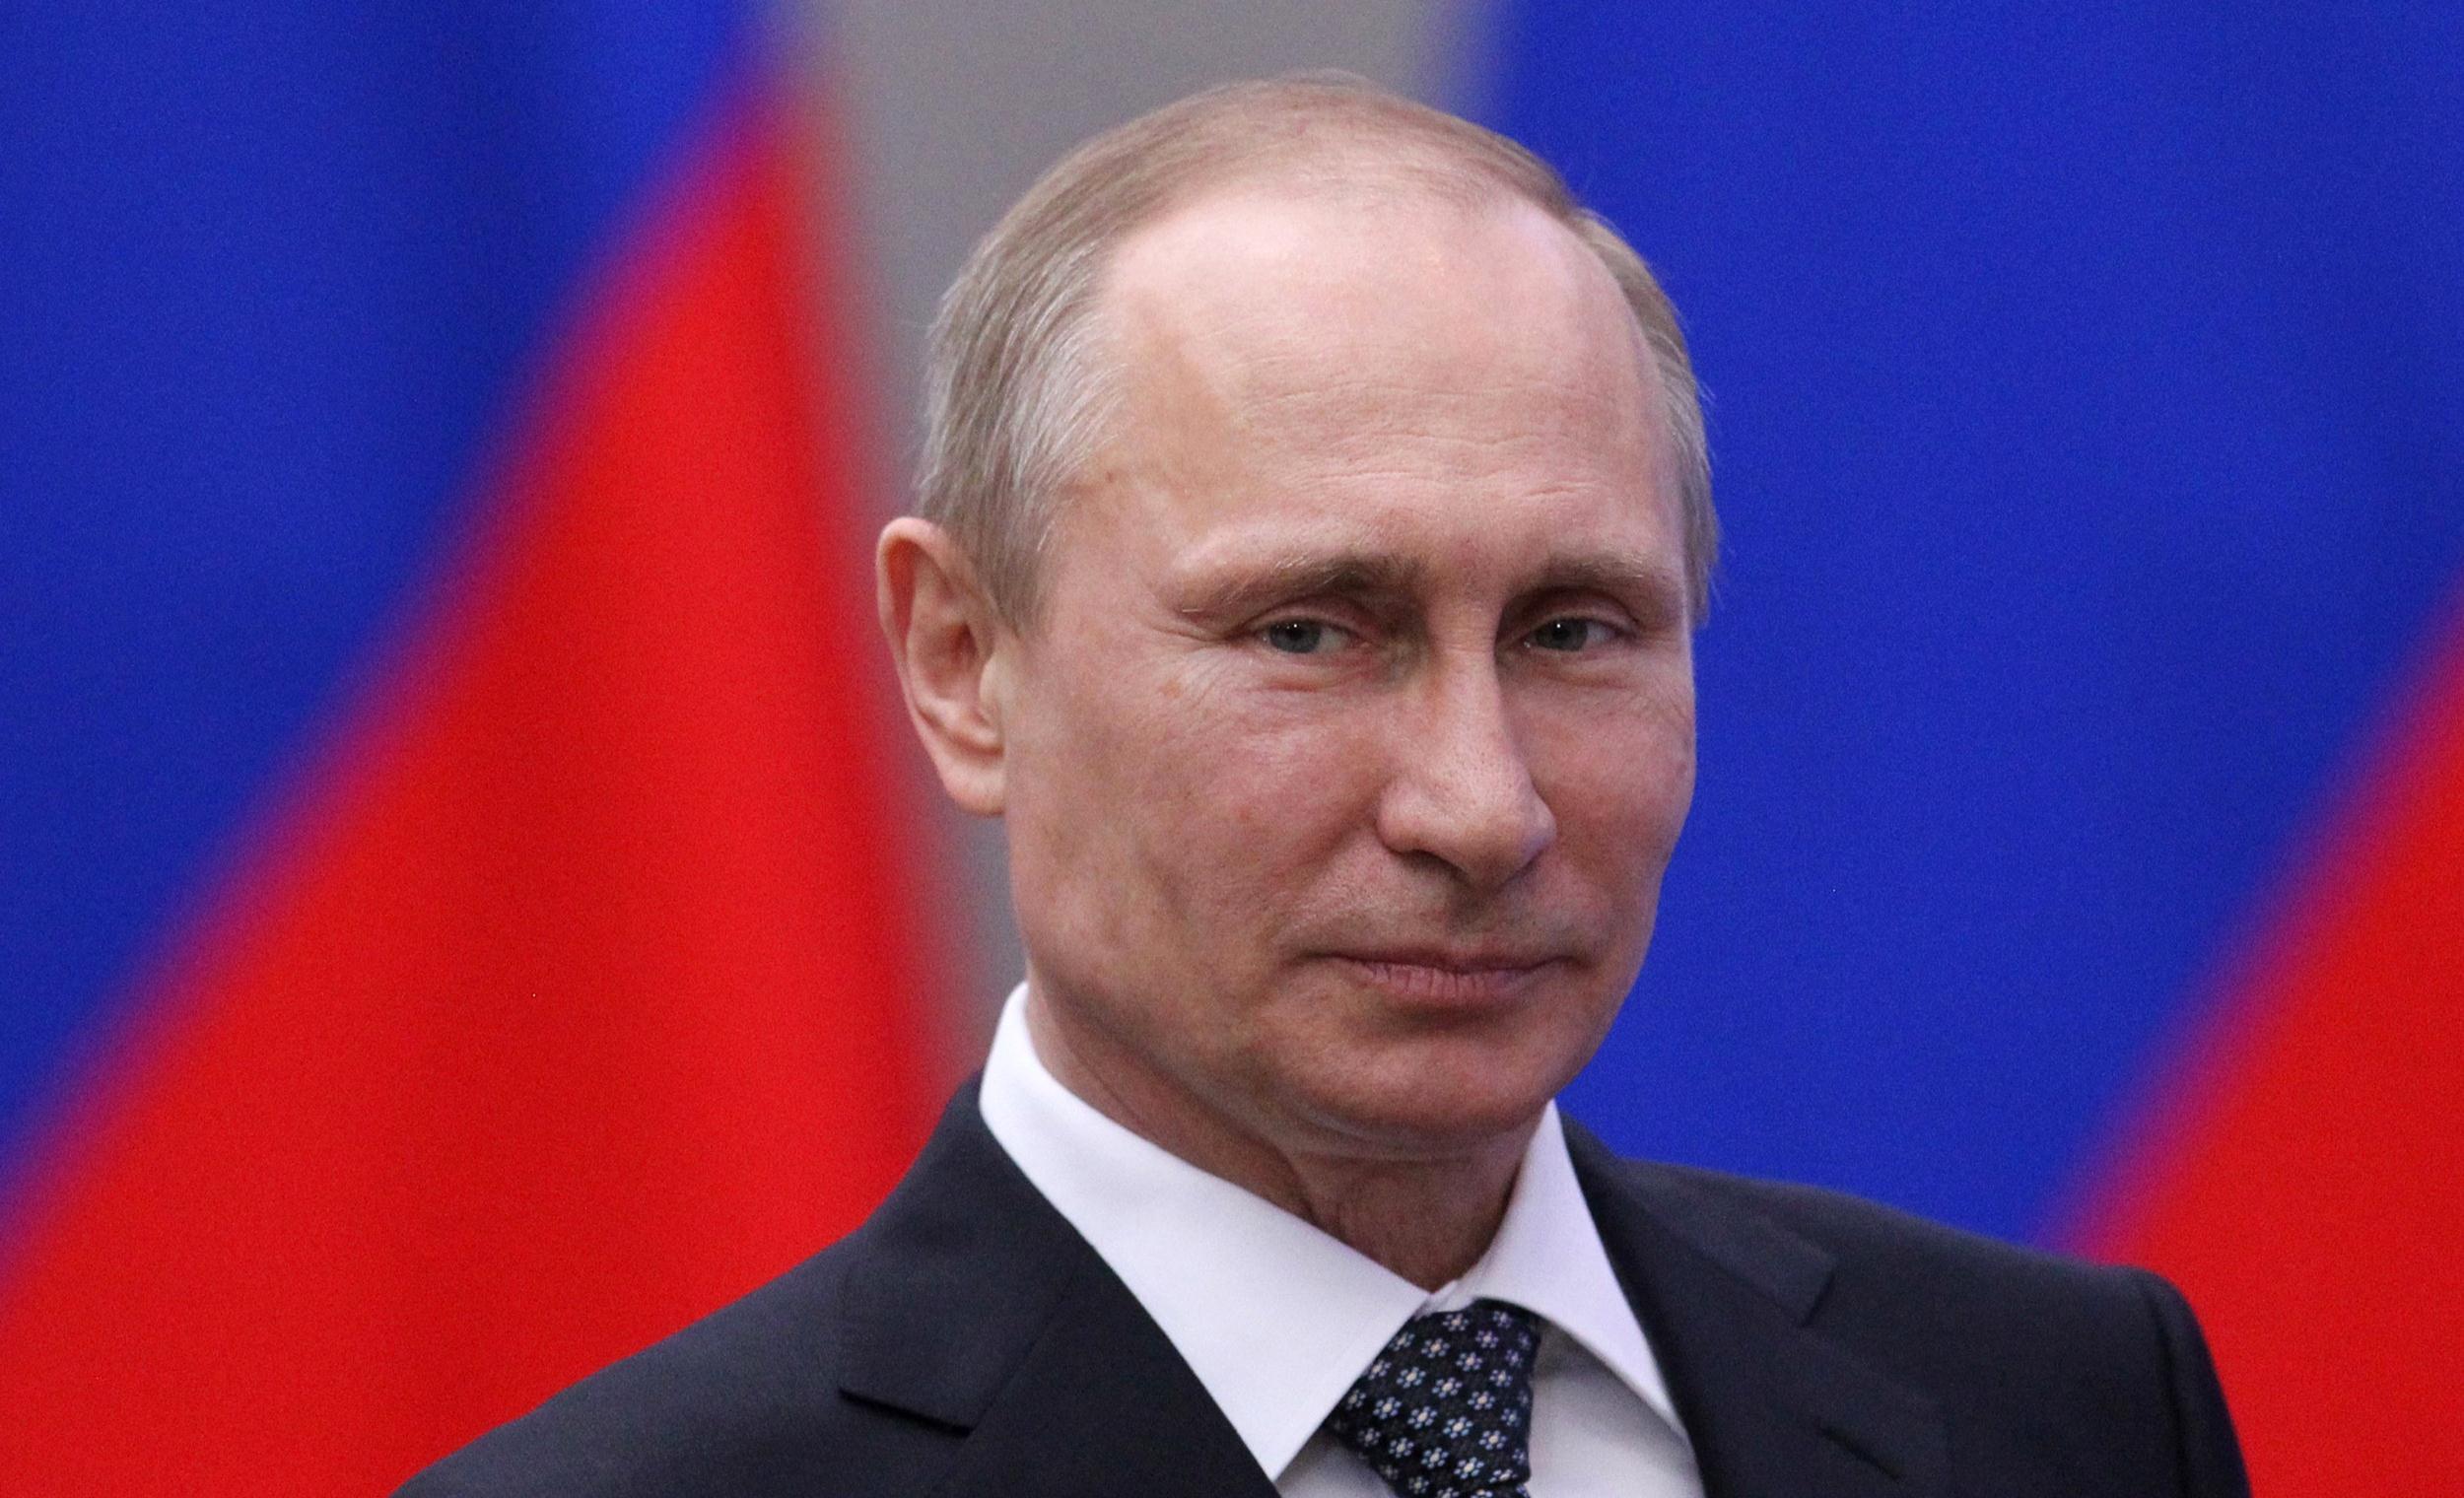 Vladimir Putin: Bitcoin Worthless, but Technology Can Come in Useful